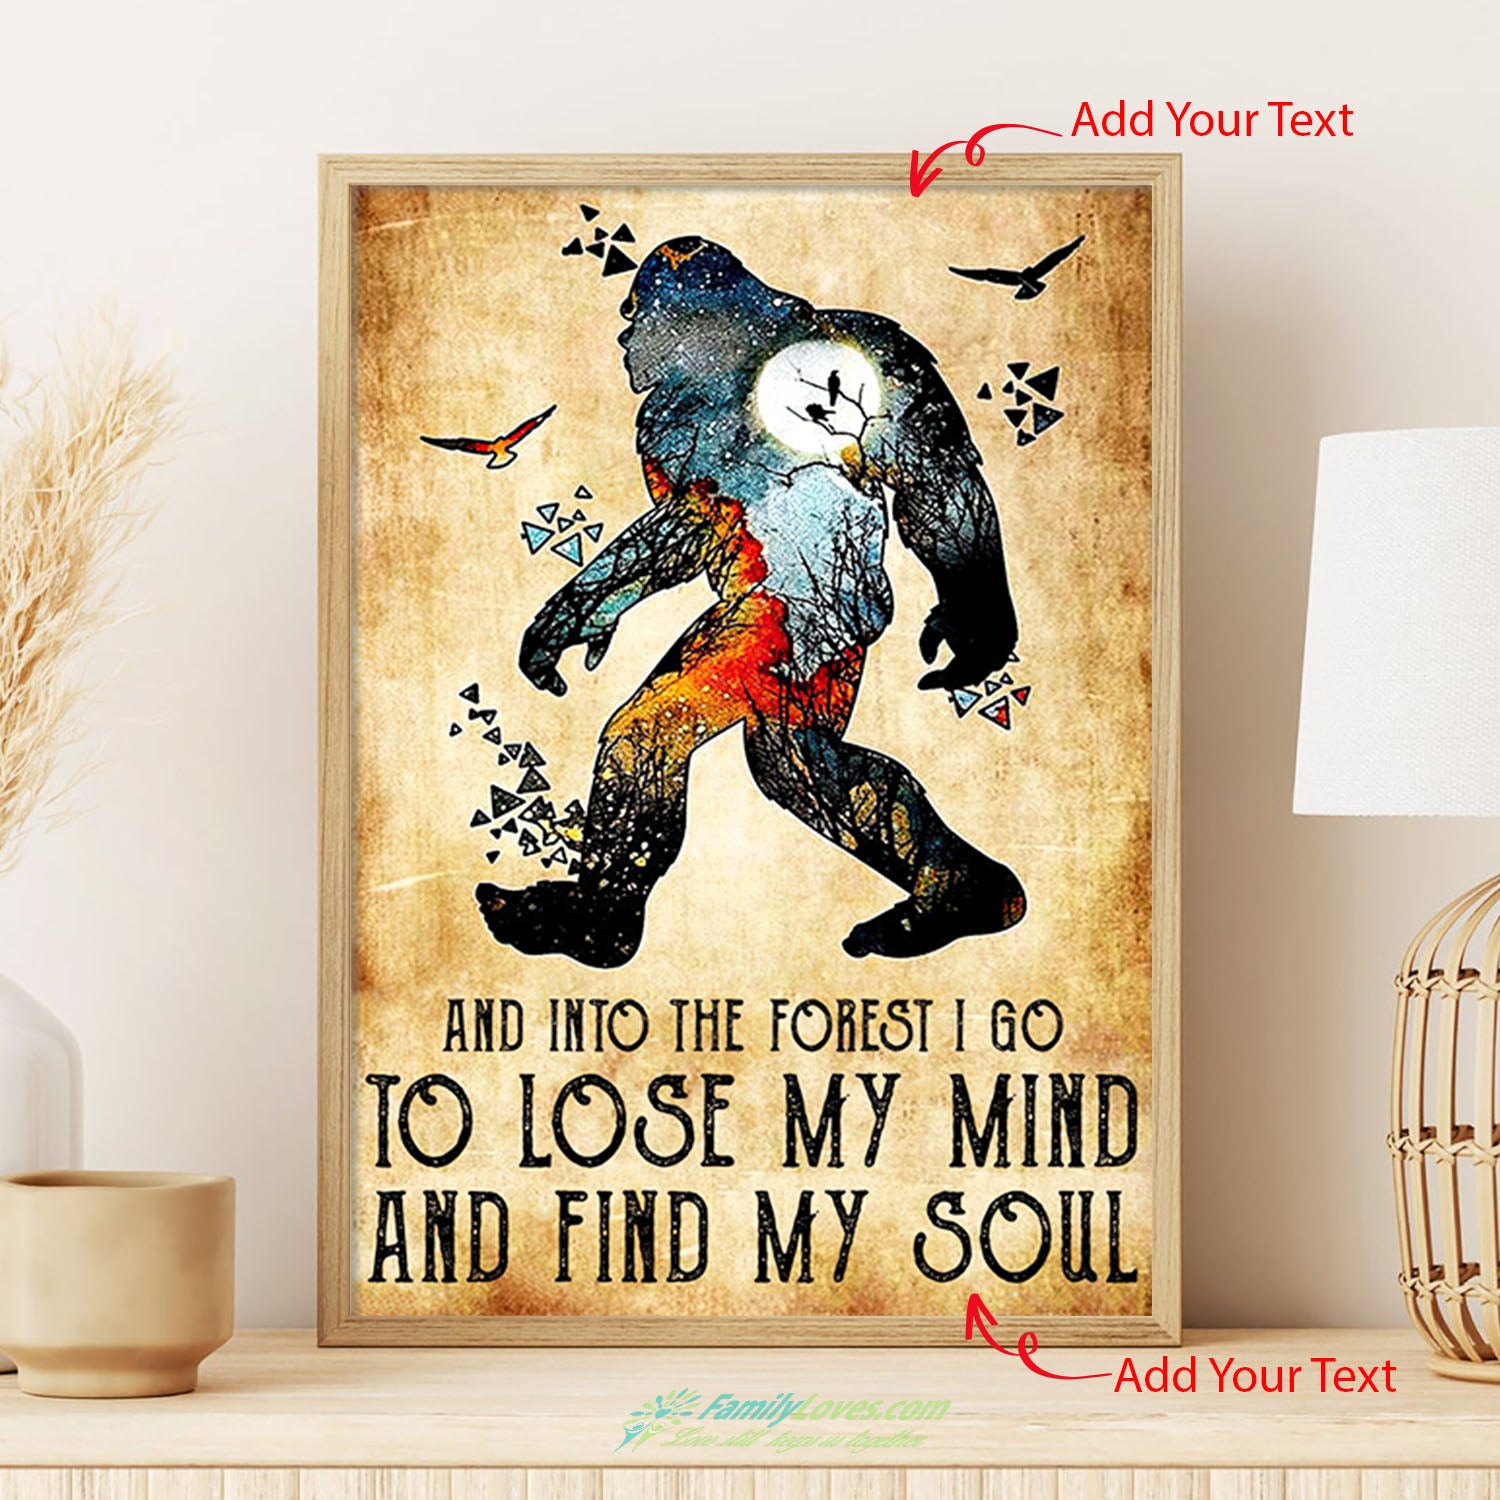 And Into The Forest I Go To Lose My Mind And Find My Soul Large Canvas Art Poster Decor All Size 1